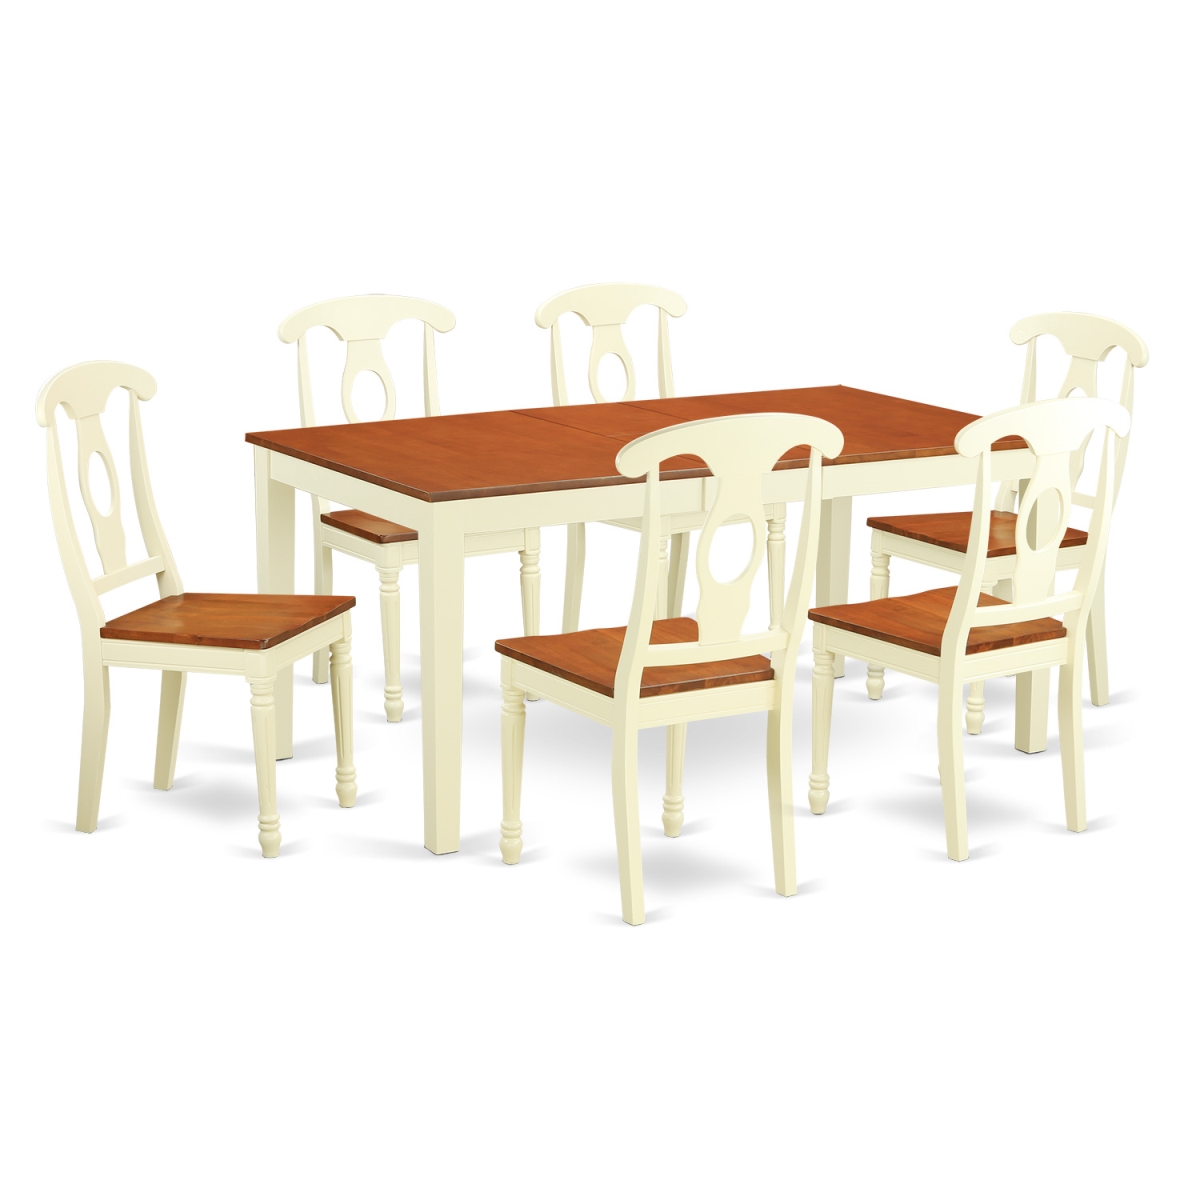 NIKE7-WHI-W Dining Room Table Sets - Kitchen Table & 6 Chairs, Buttermilk & Cherry - 7 Piece -  East West Furniture